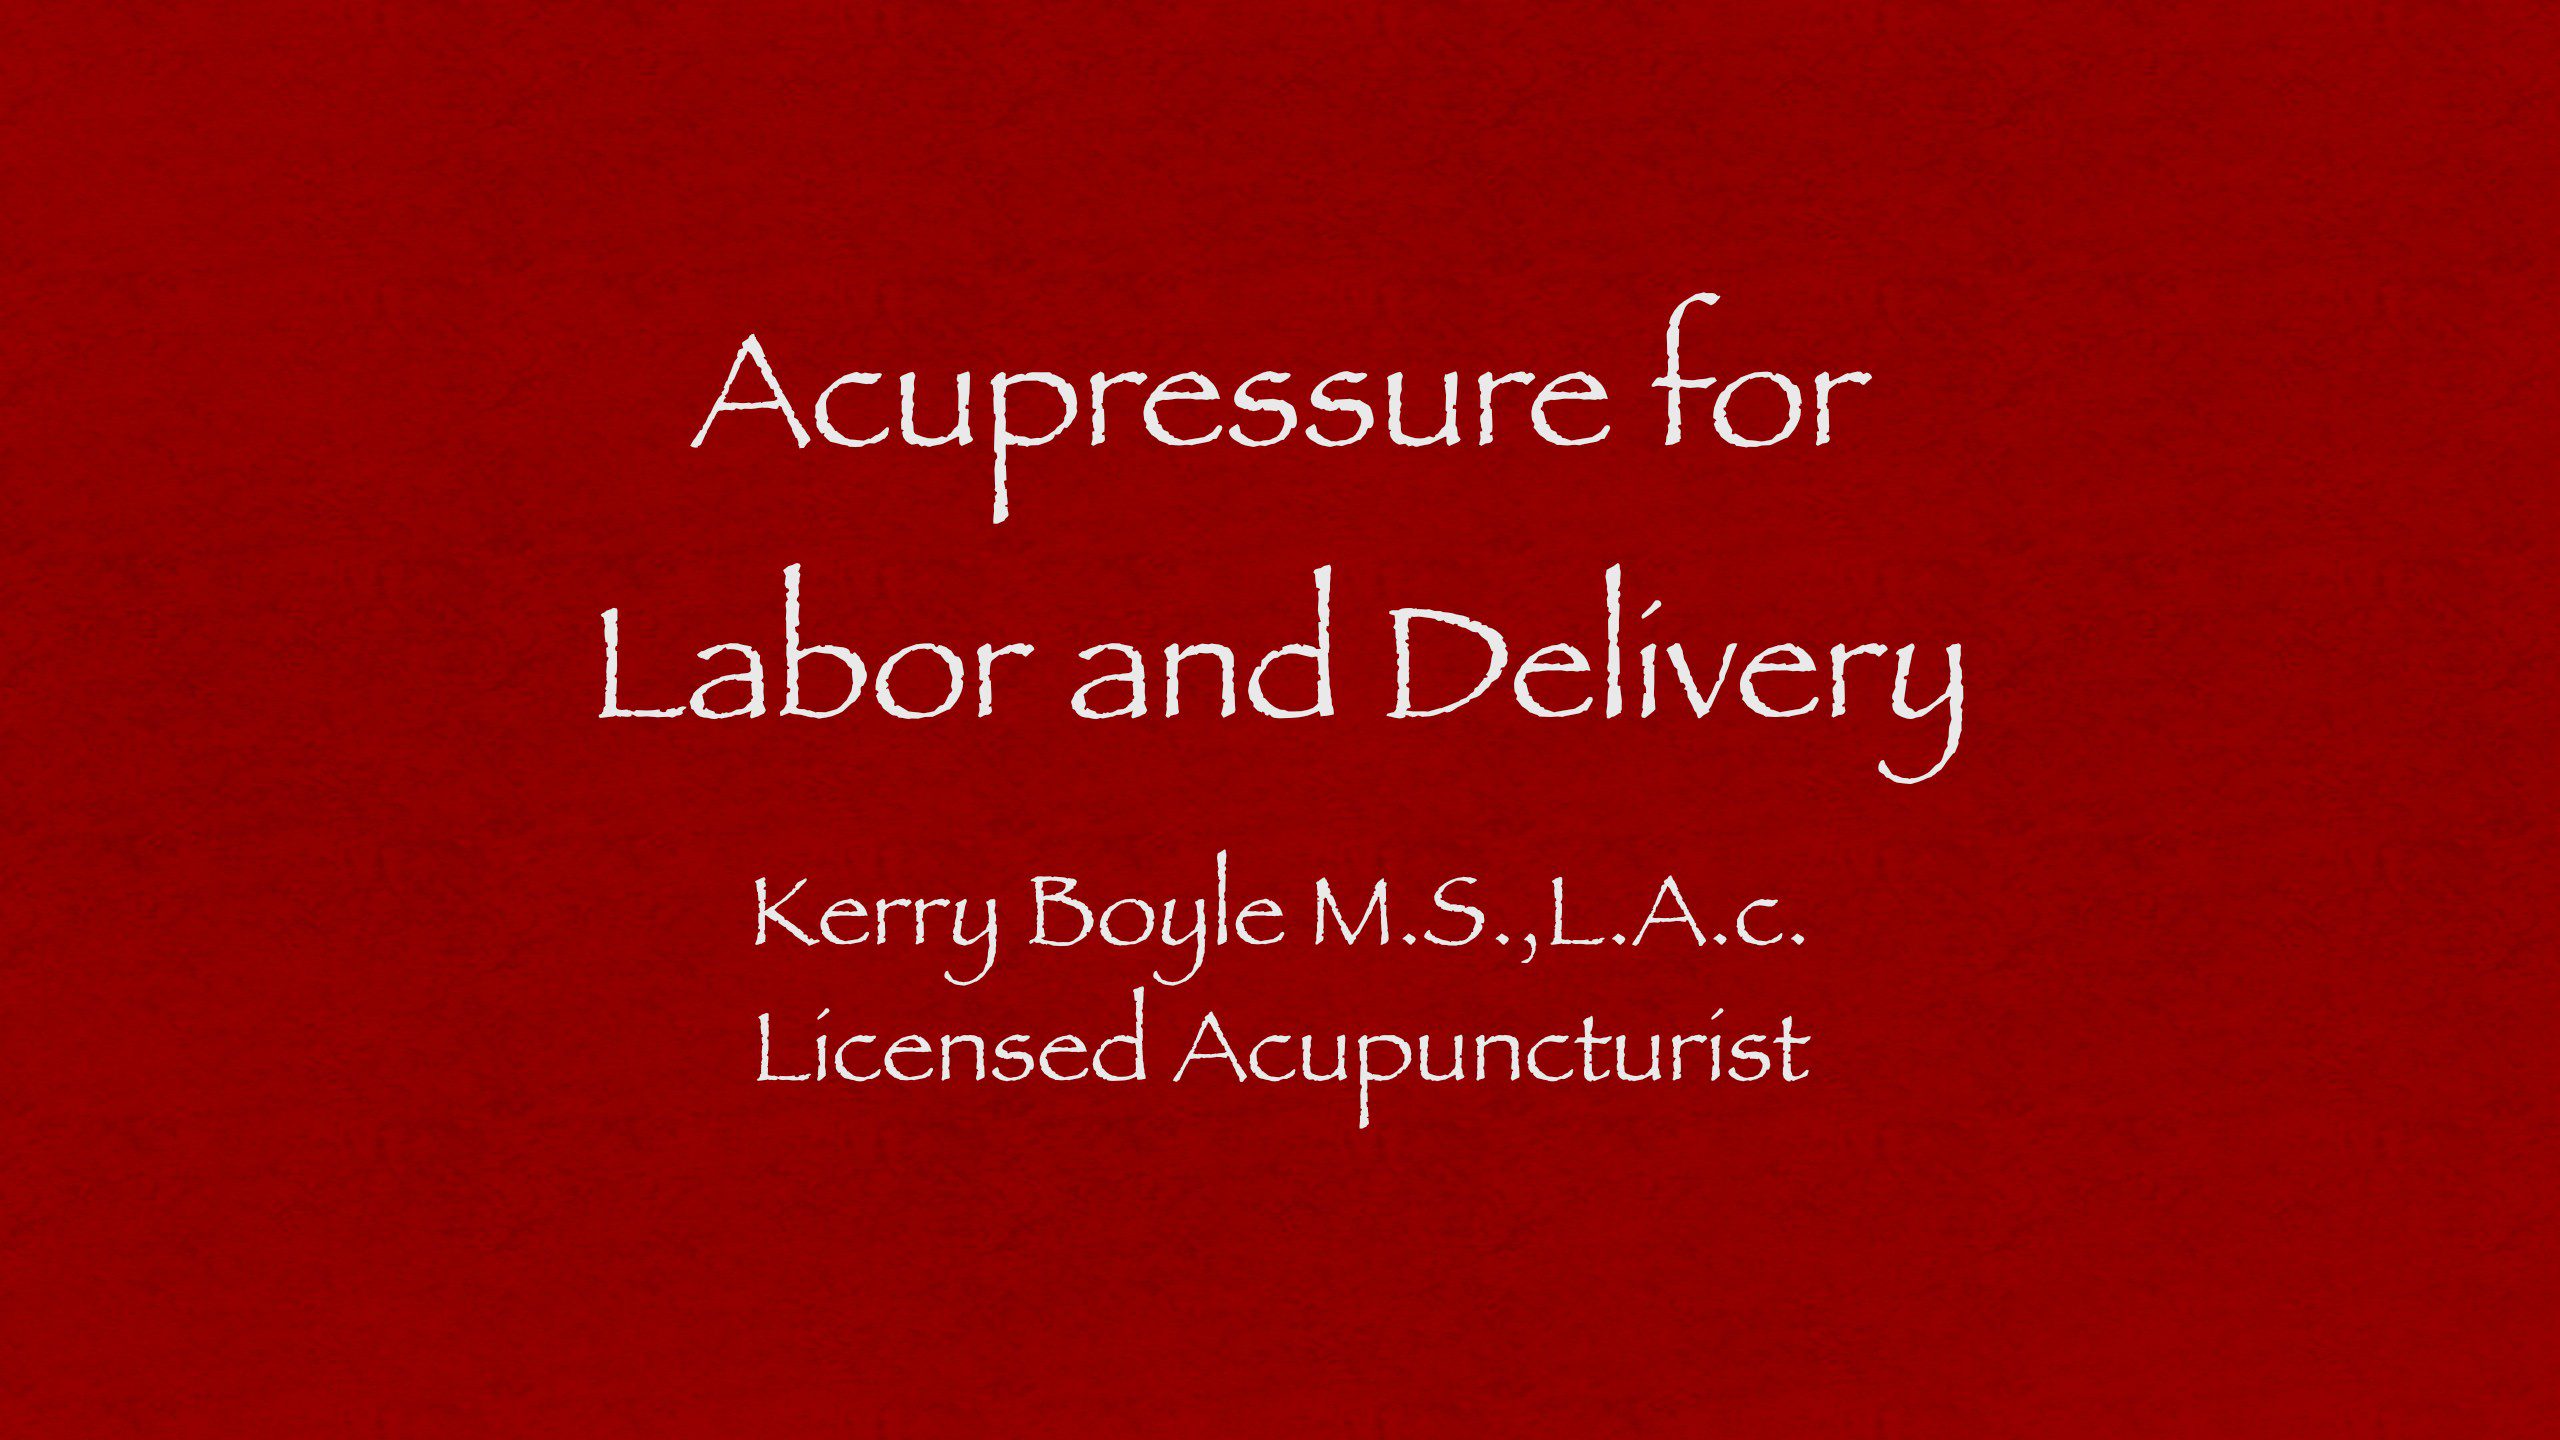 Acupuncture for labor and delivery